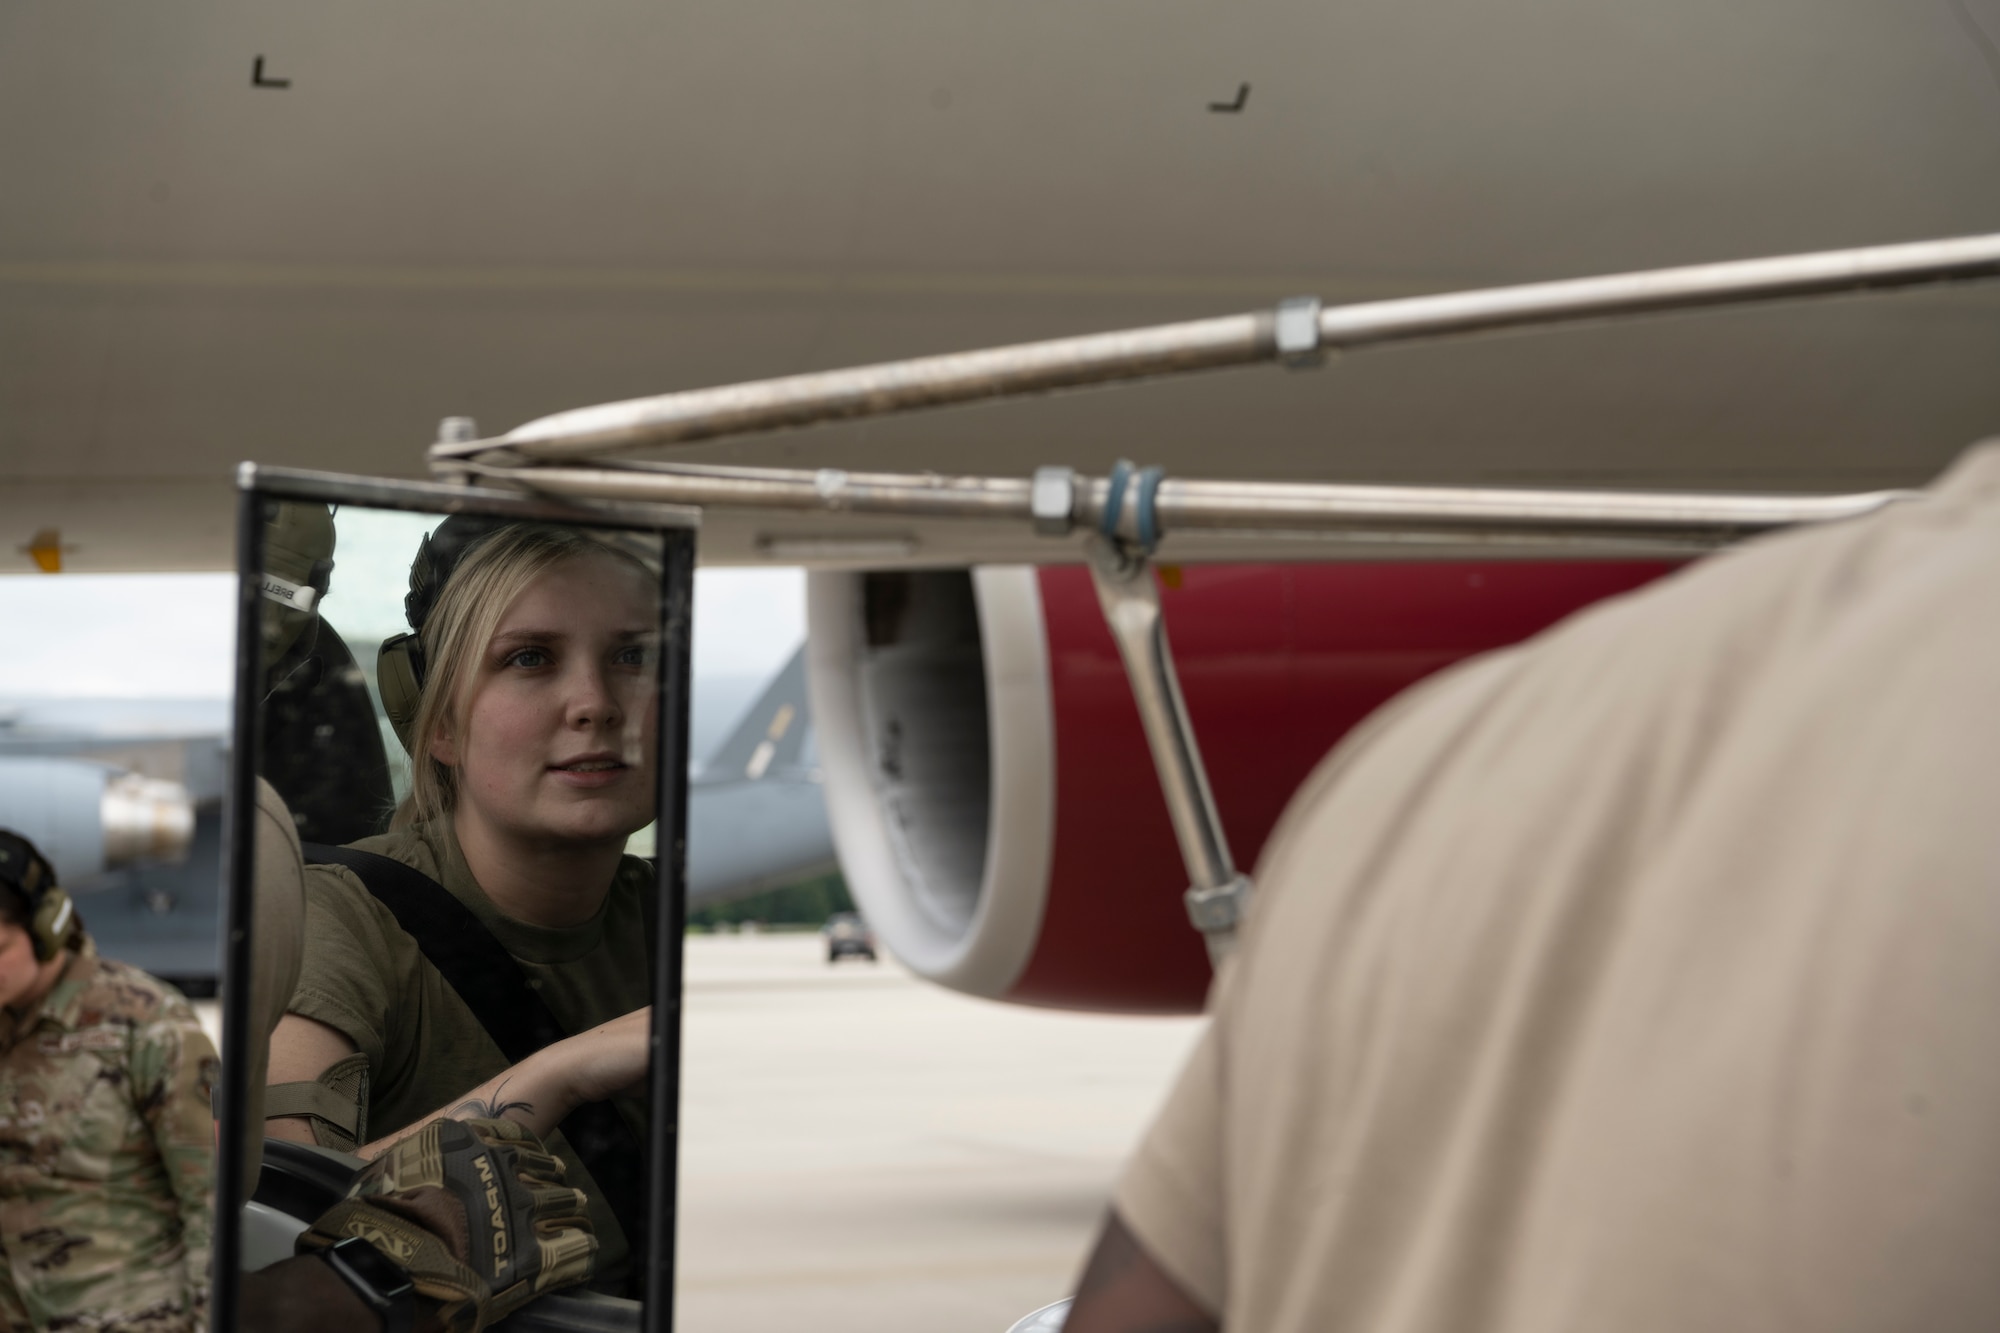 U.S. Air Force Airman 1st Class Erin Billings, 726th Air Mobility Squadron passenger service agent, drives a stair truck to offload passengers from a Patriot Express passenger jet on Spangdahlem Air Base, Germany, Aug. 23, 2021.